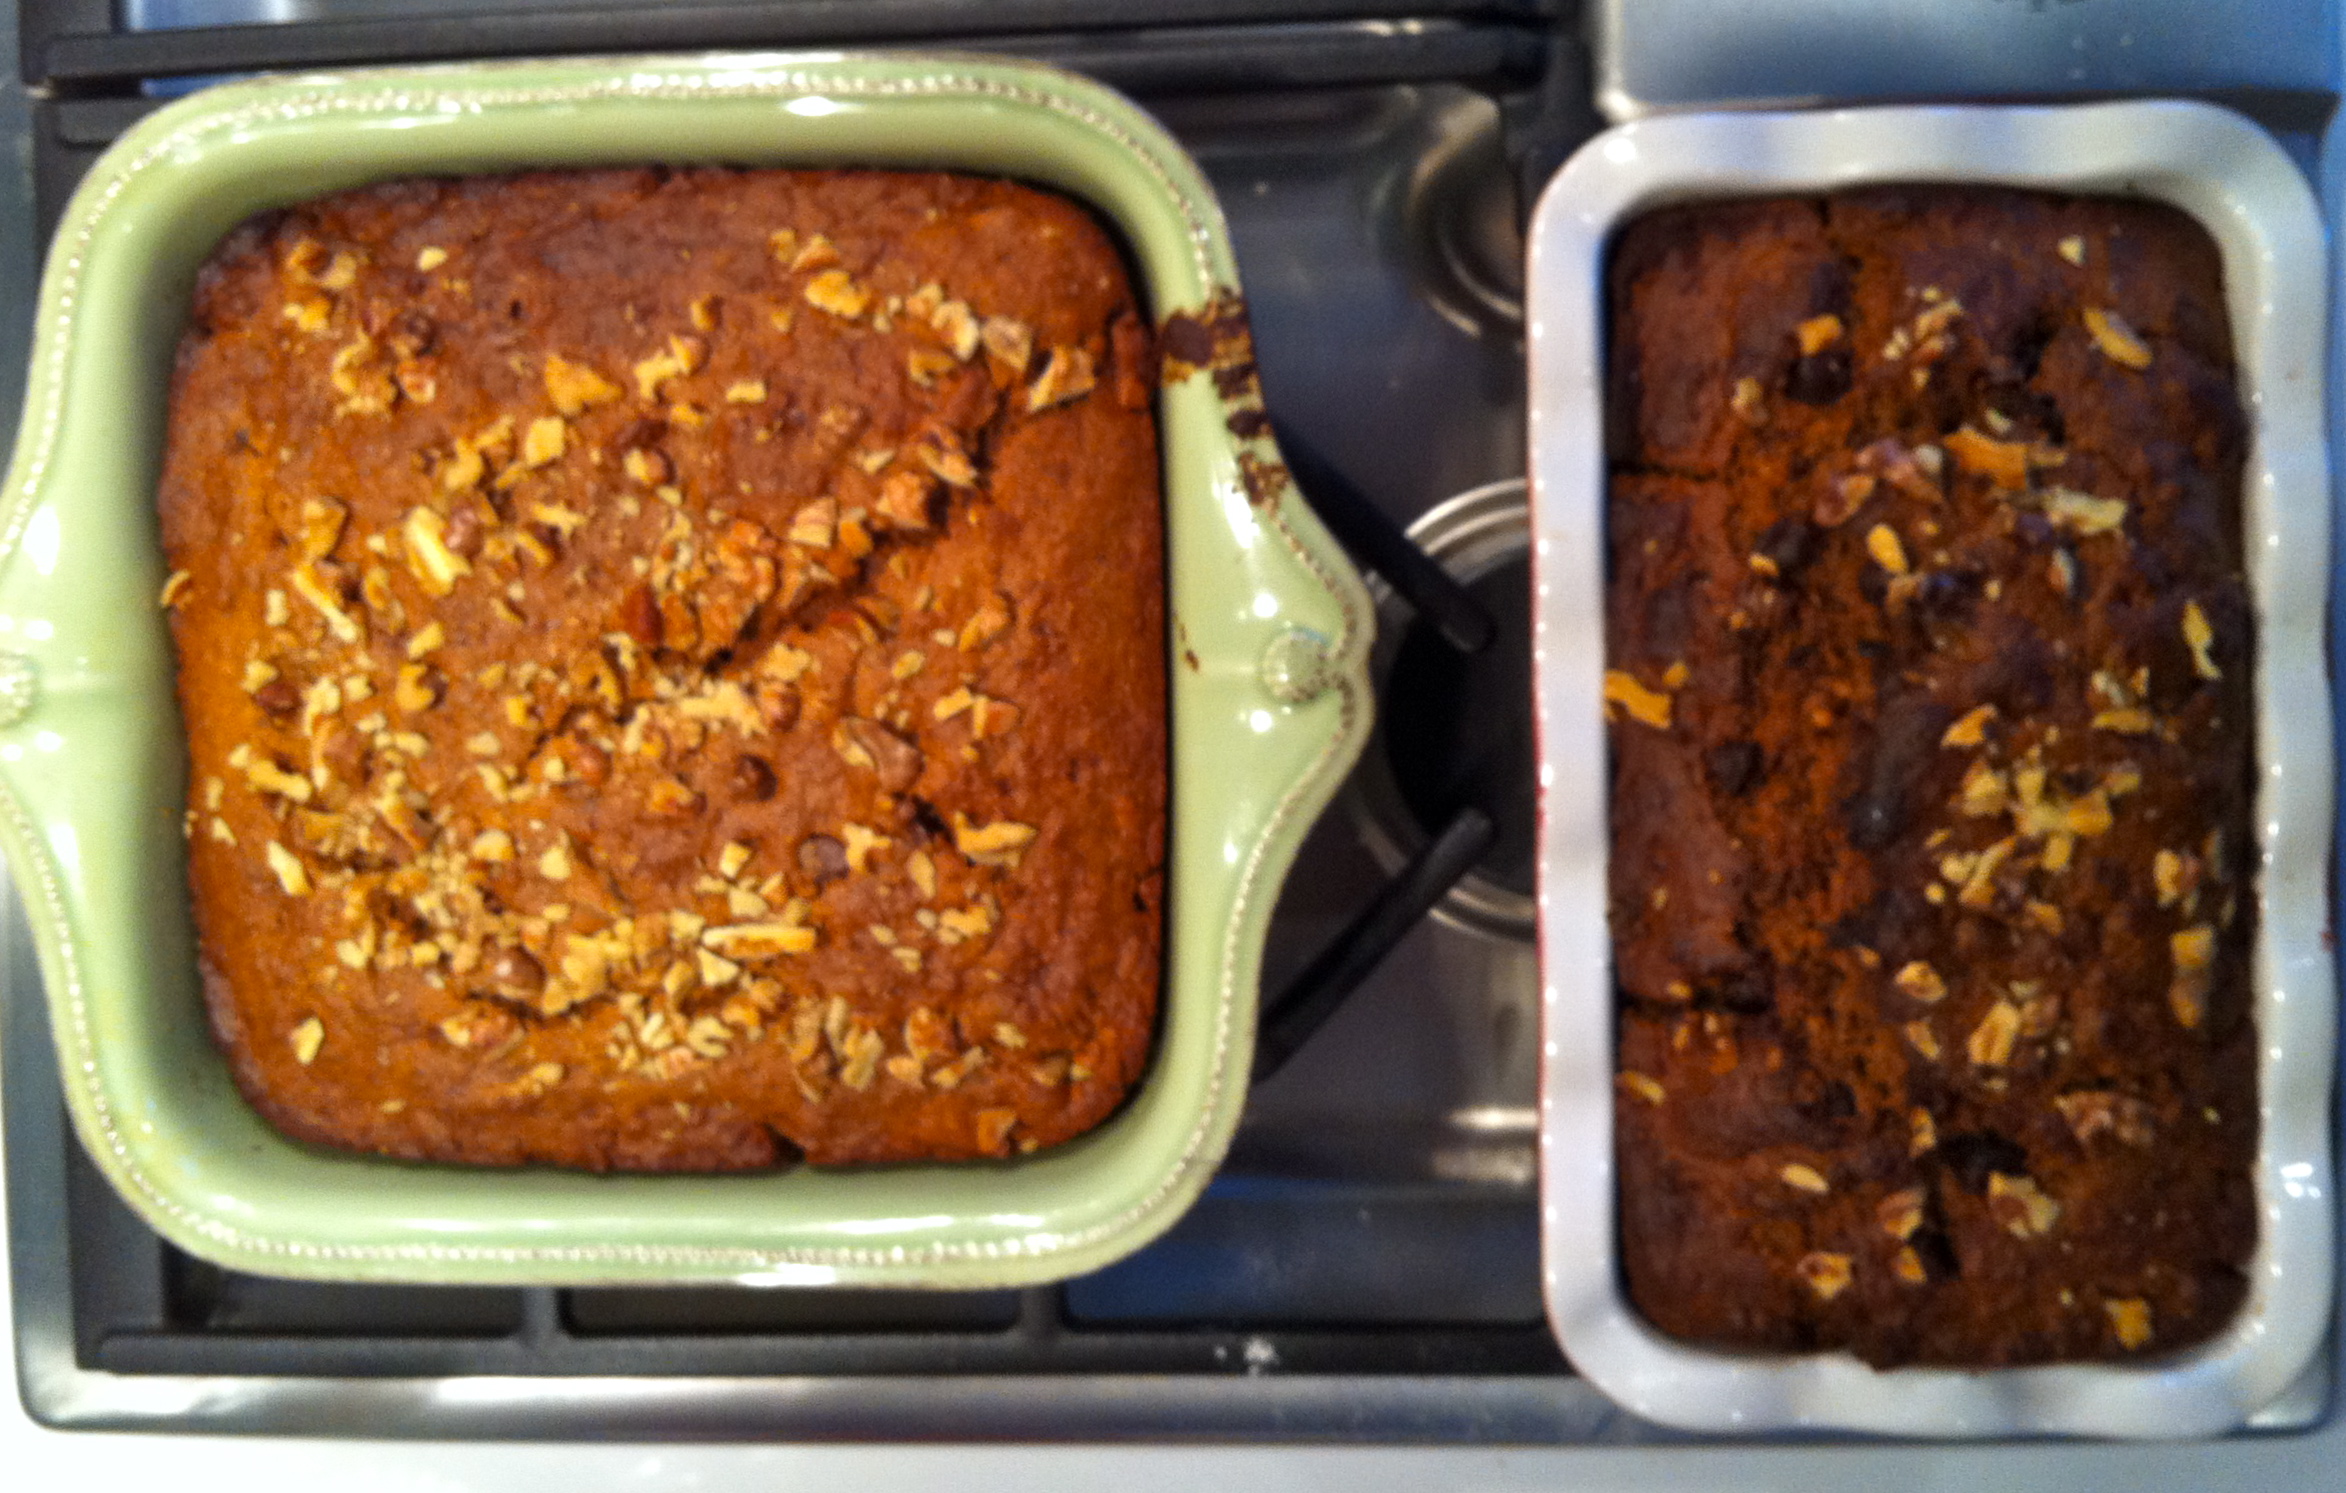 Here are both of my vegan banana breads and they smell delicious!